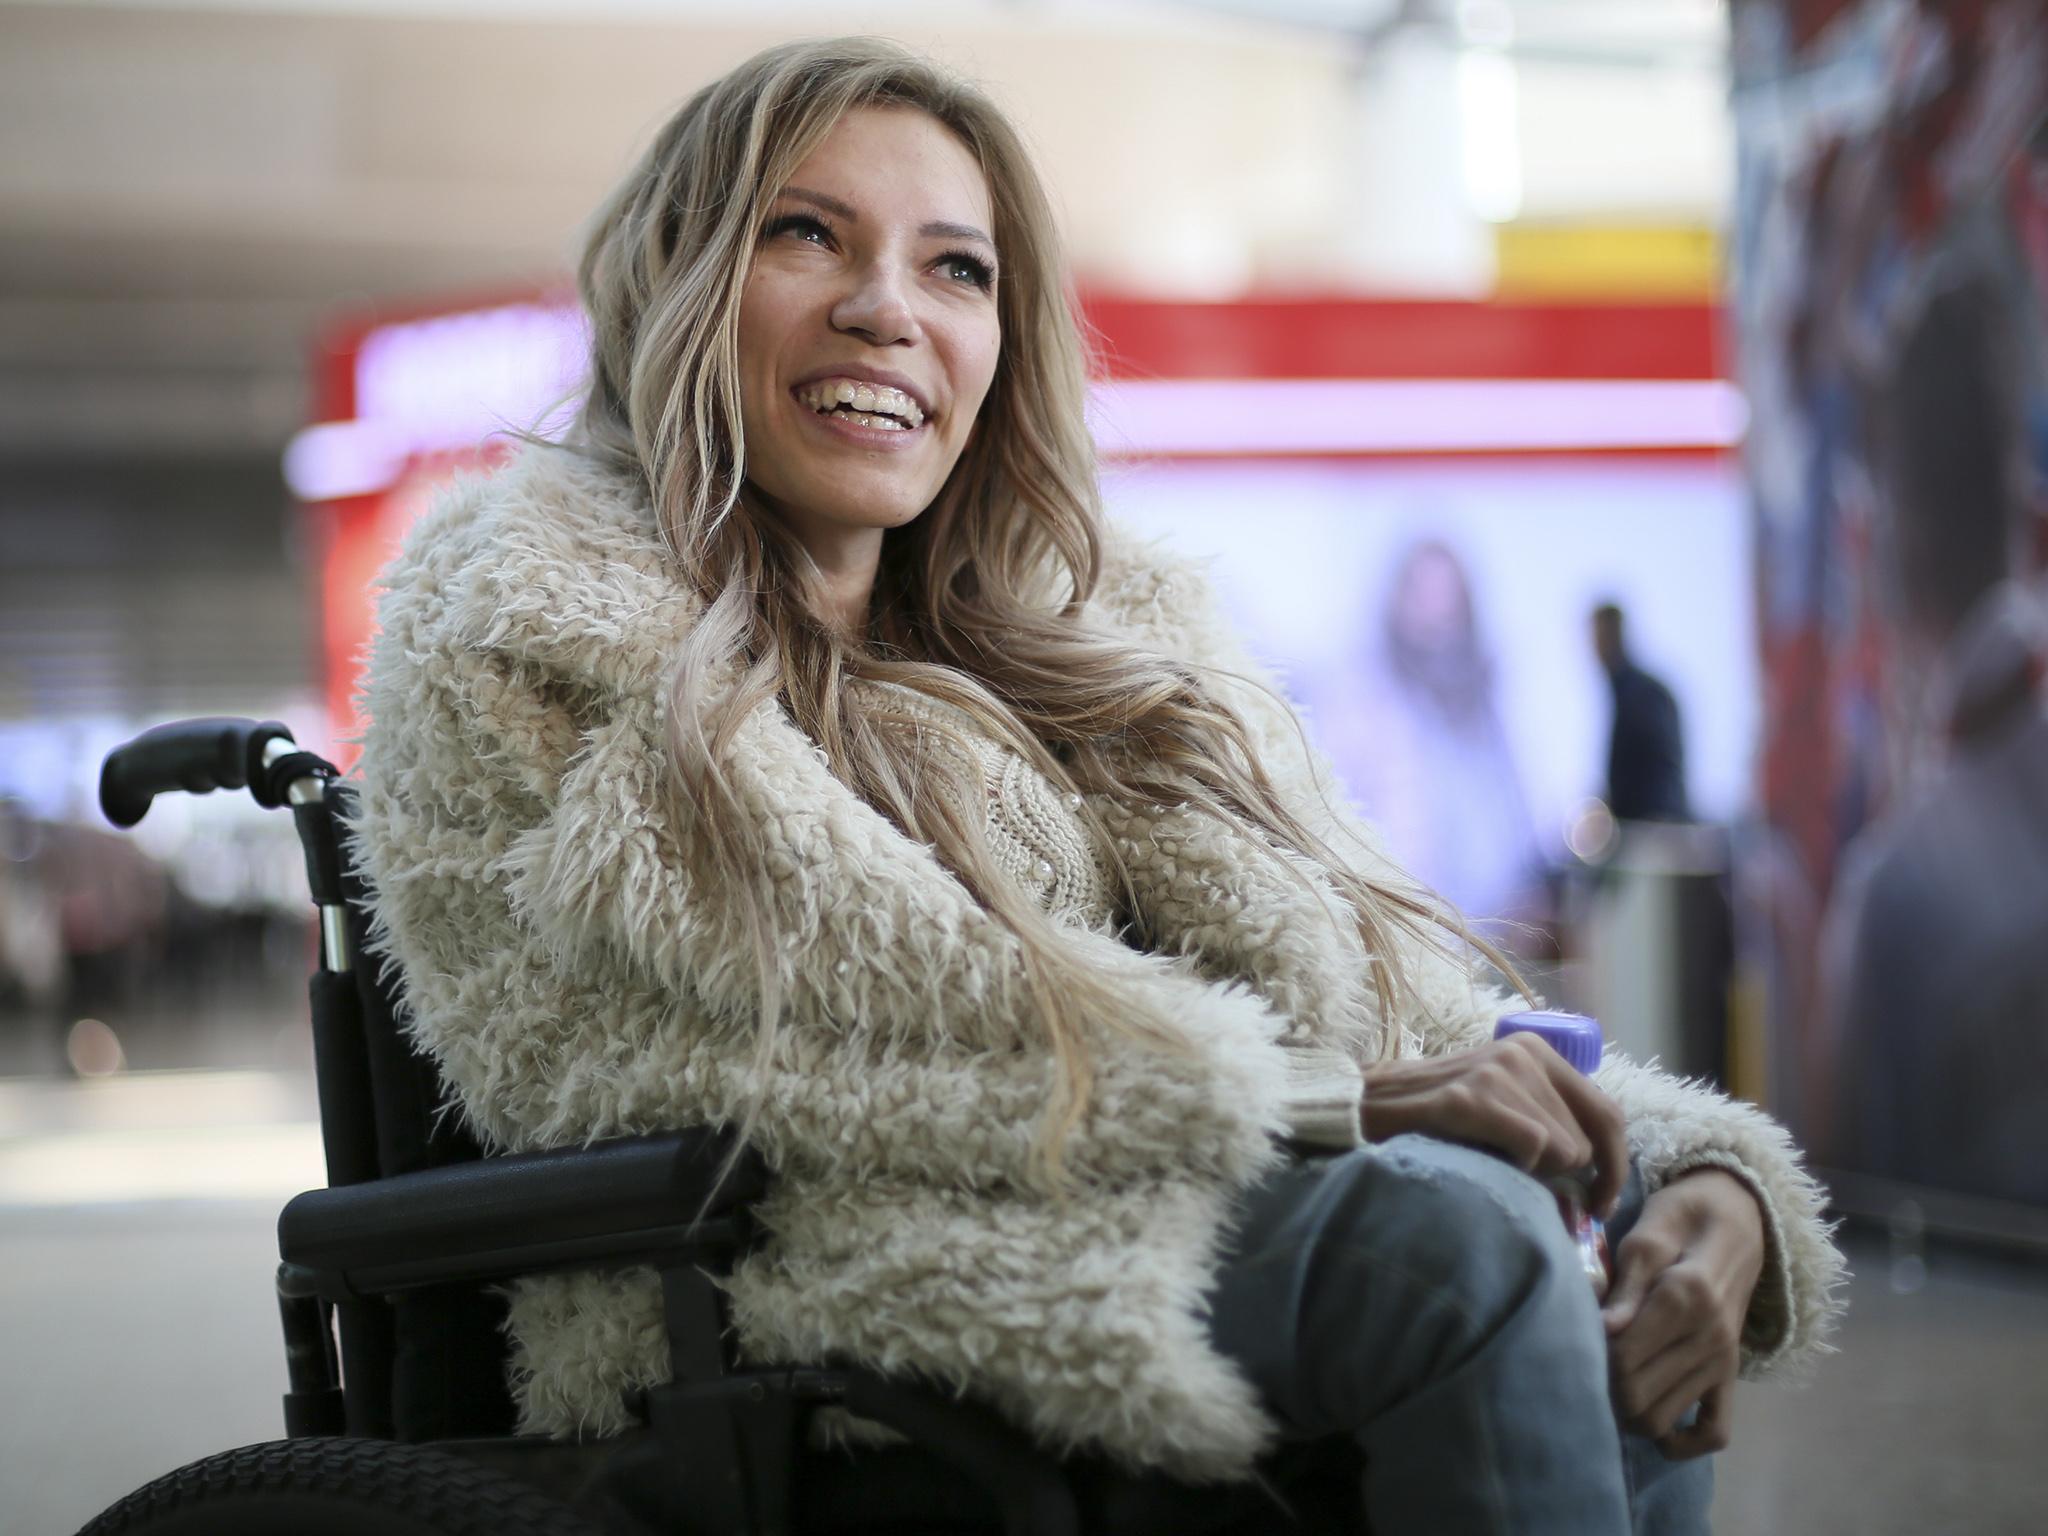 Russian singer Yulia Samoylova who was chosen to represent Russia in the 2017 Eurovision Song Contest, poses while sitting in a wheelchair at Sheremetyevo airport outside Moscow, Russia